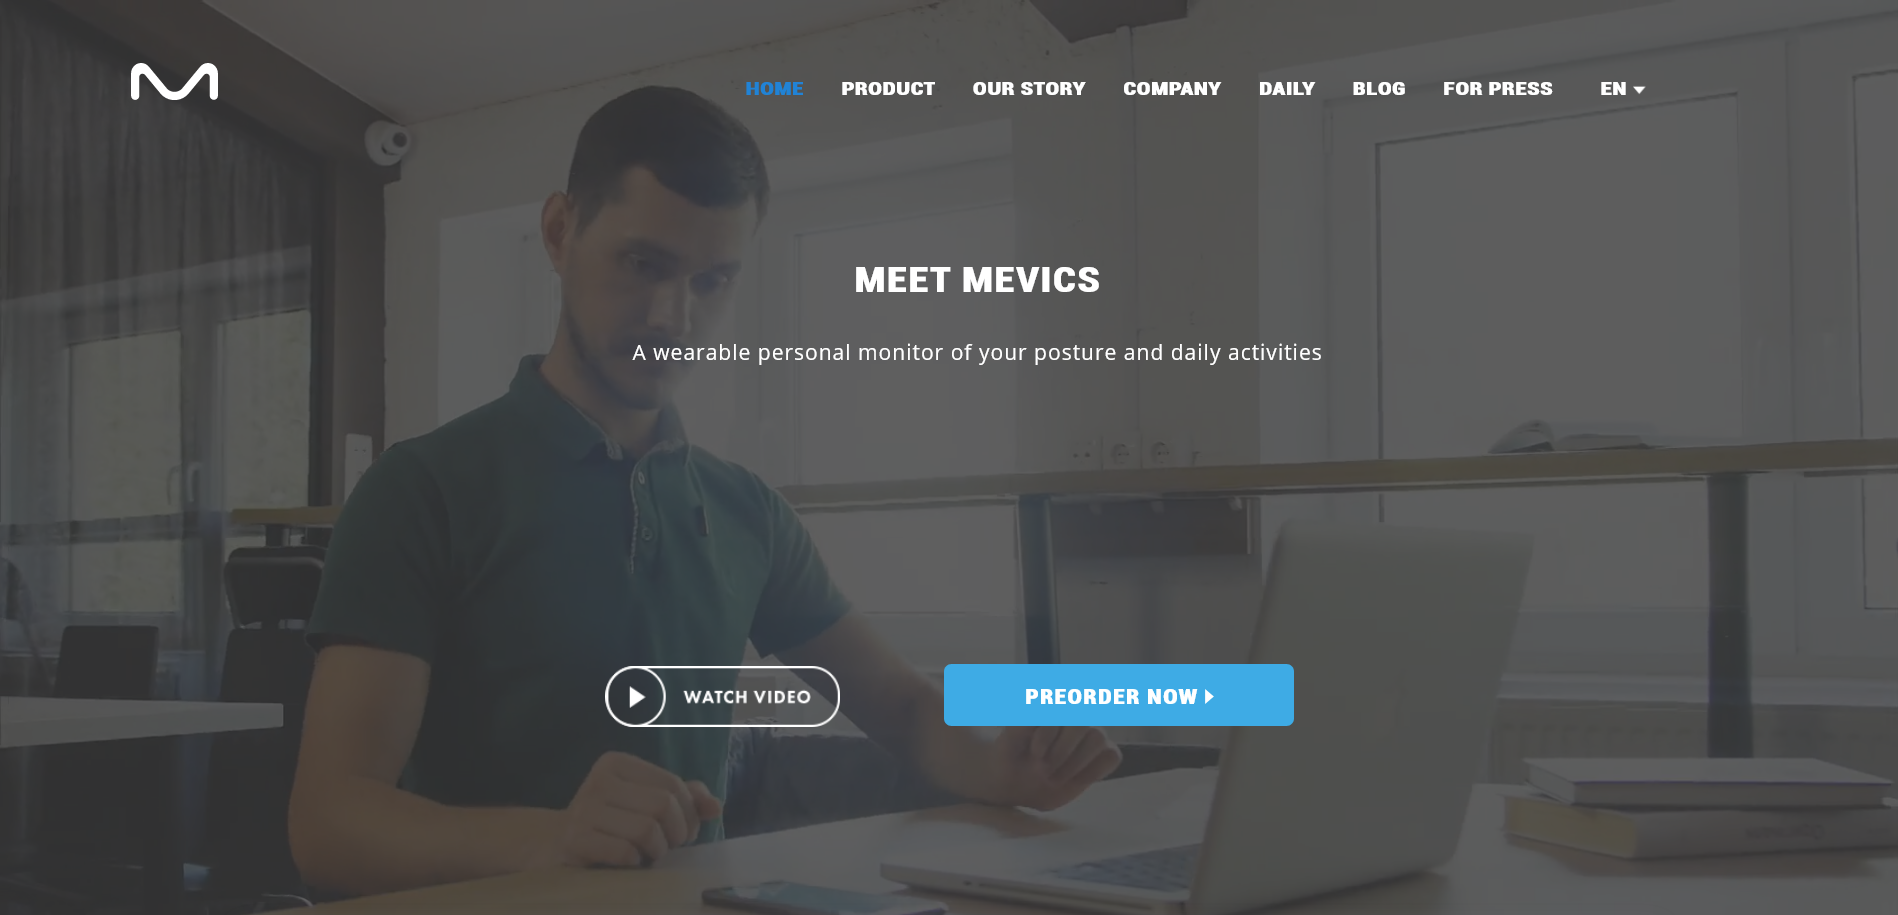 Find detailed information about Mevics